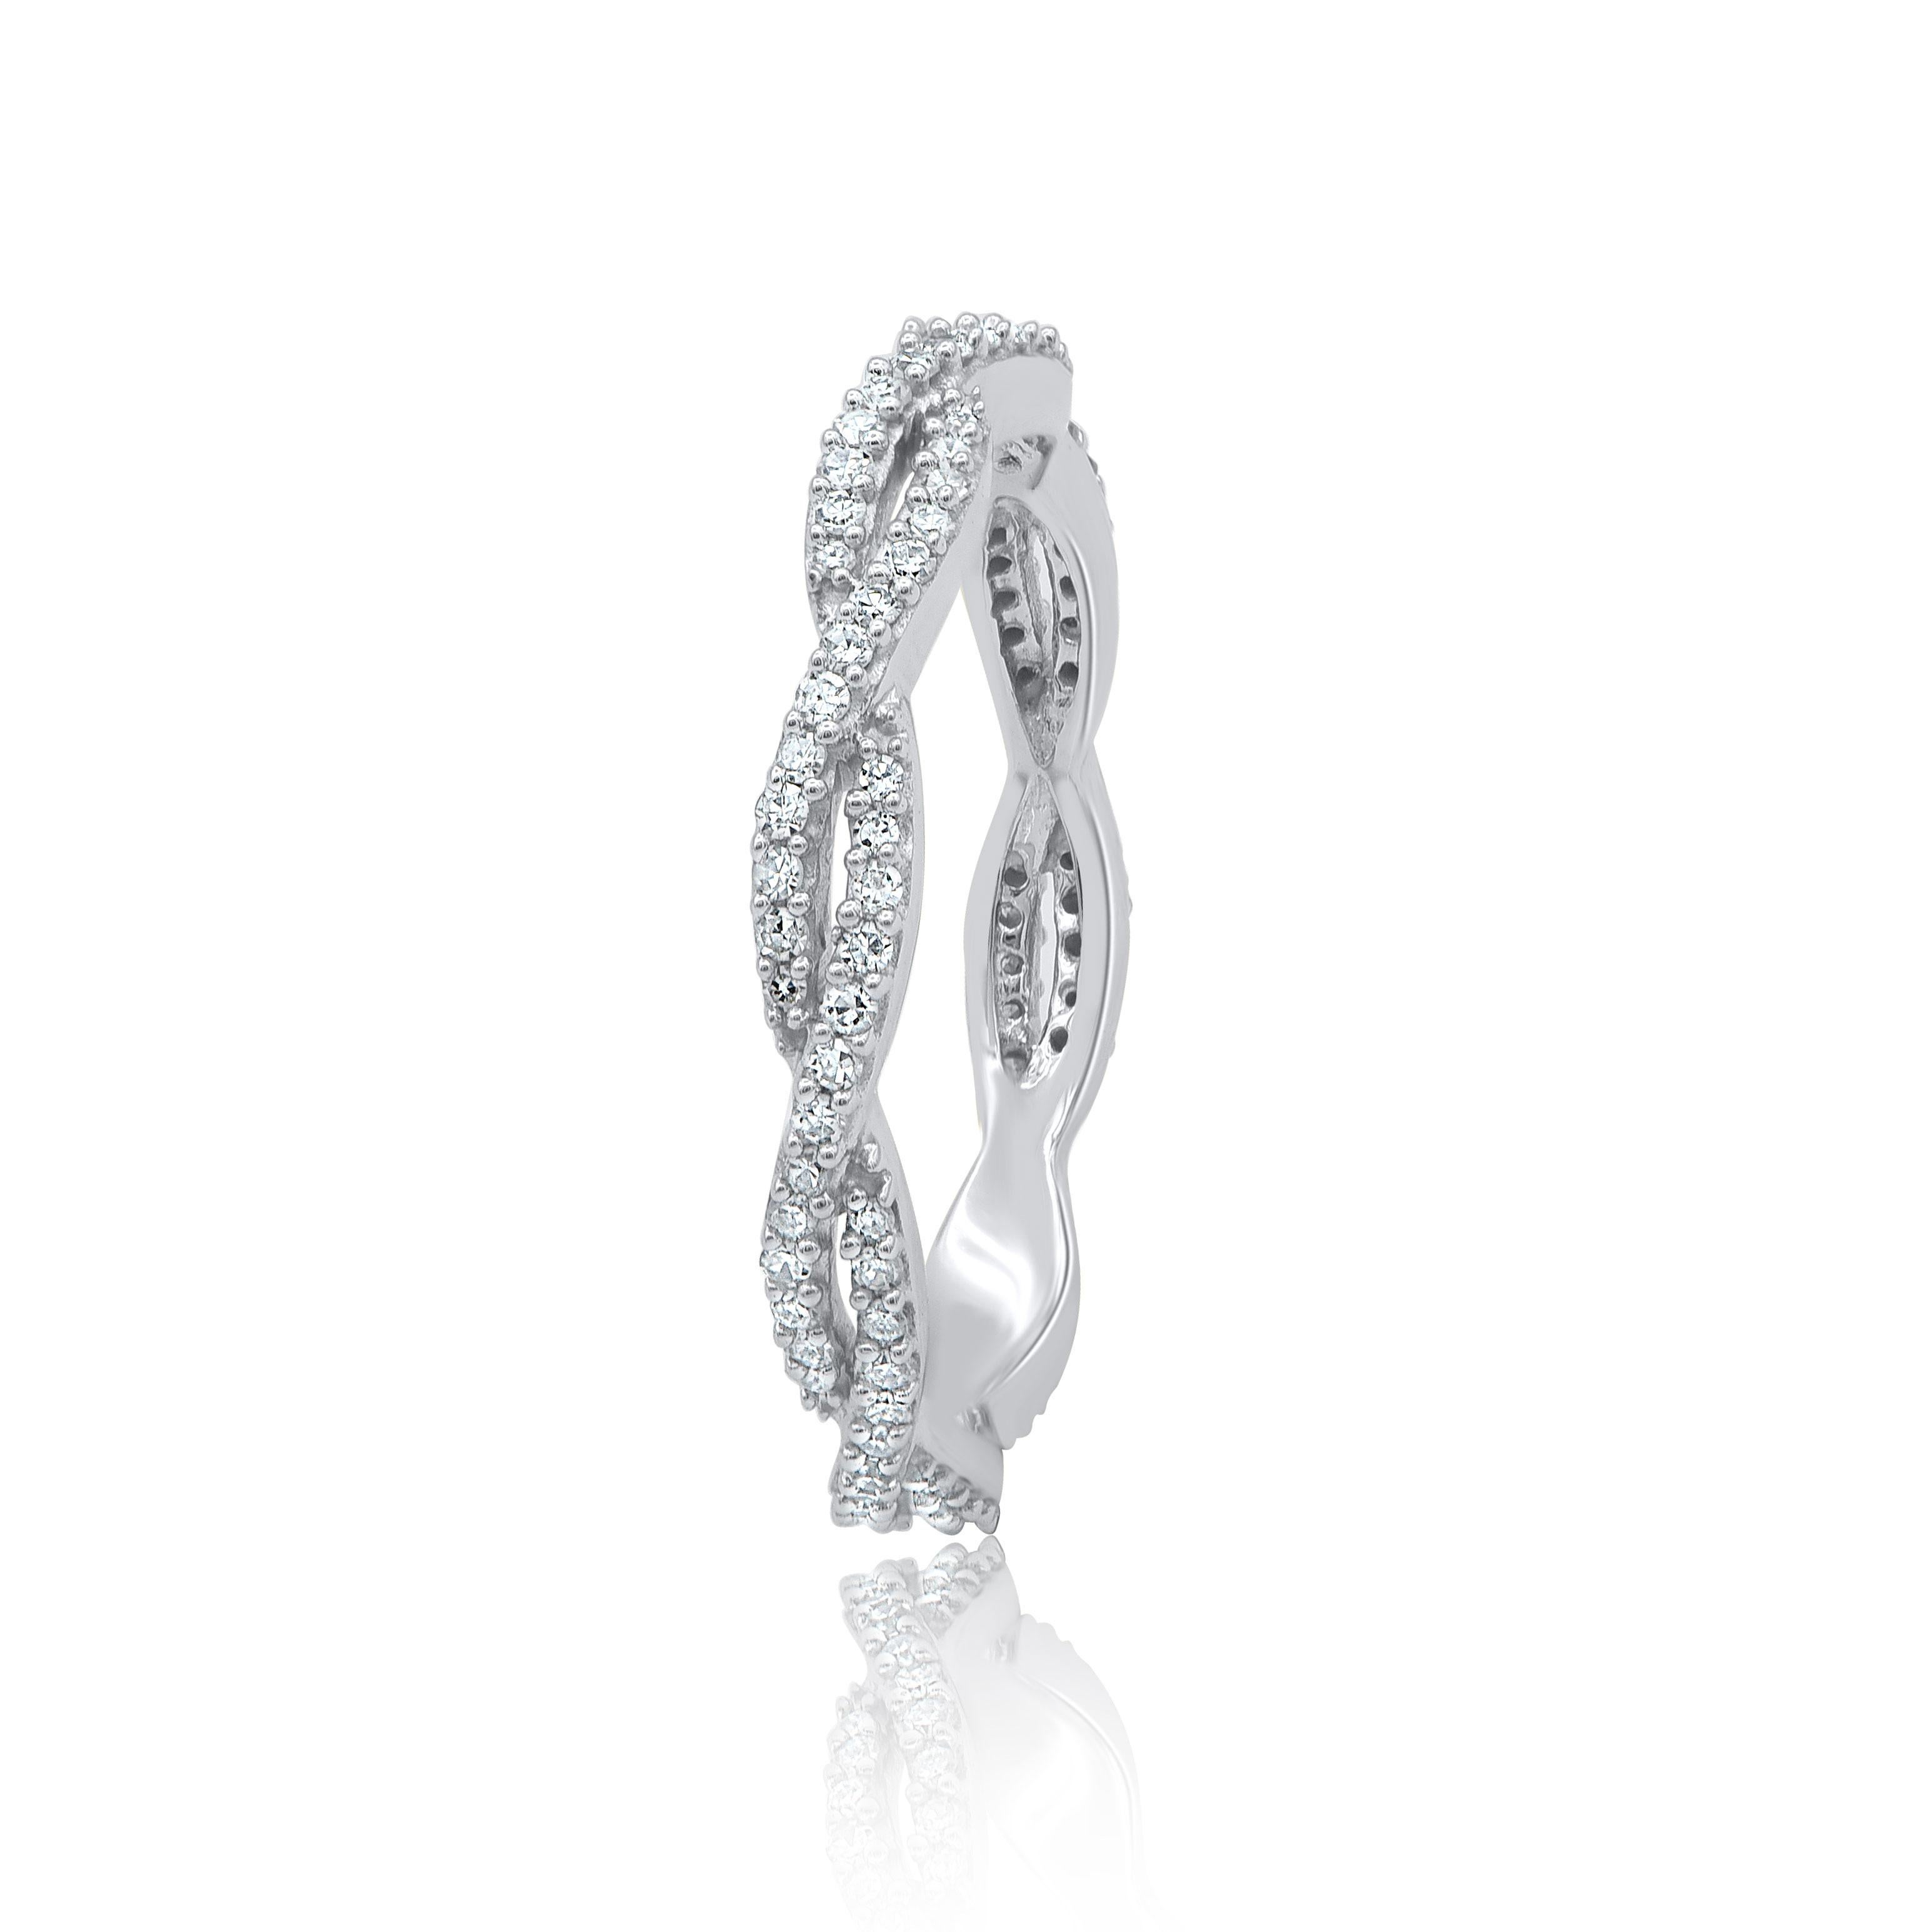 Honor the women you love with this eternity wedding band is expertly crafted in 14 Karat White Gold and features 104 single cut round diamond set in prong setting. This eternity band has high polish finish and is a valuable addition to any jewelry